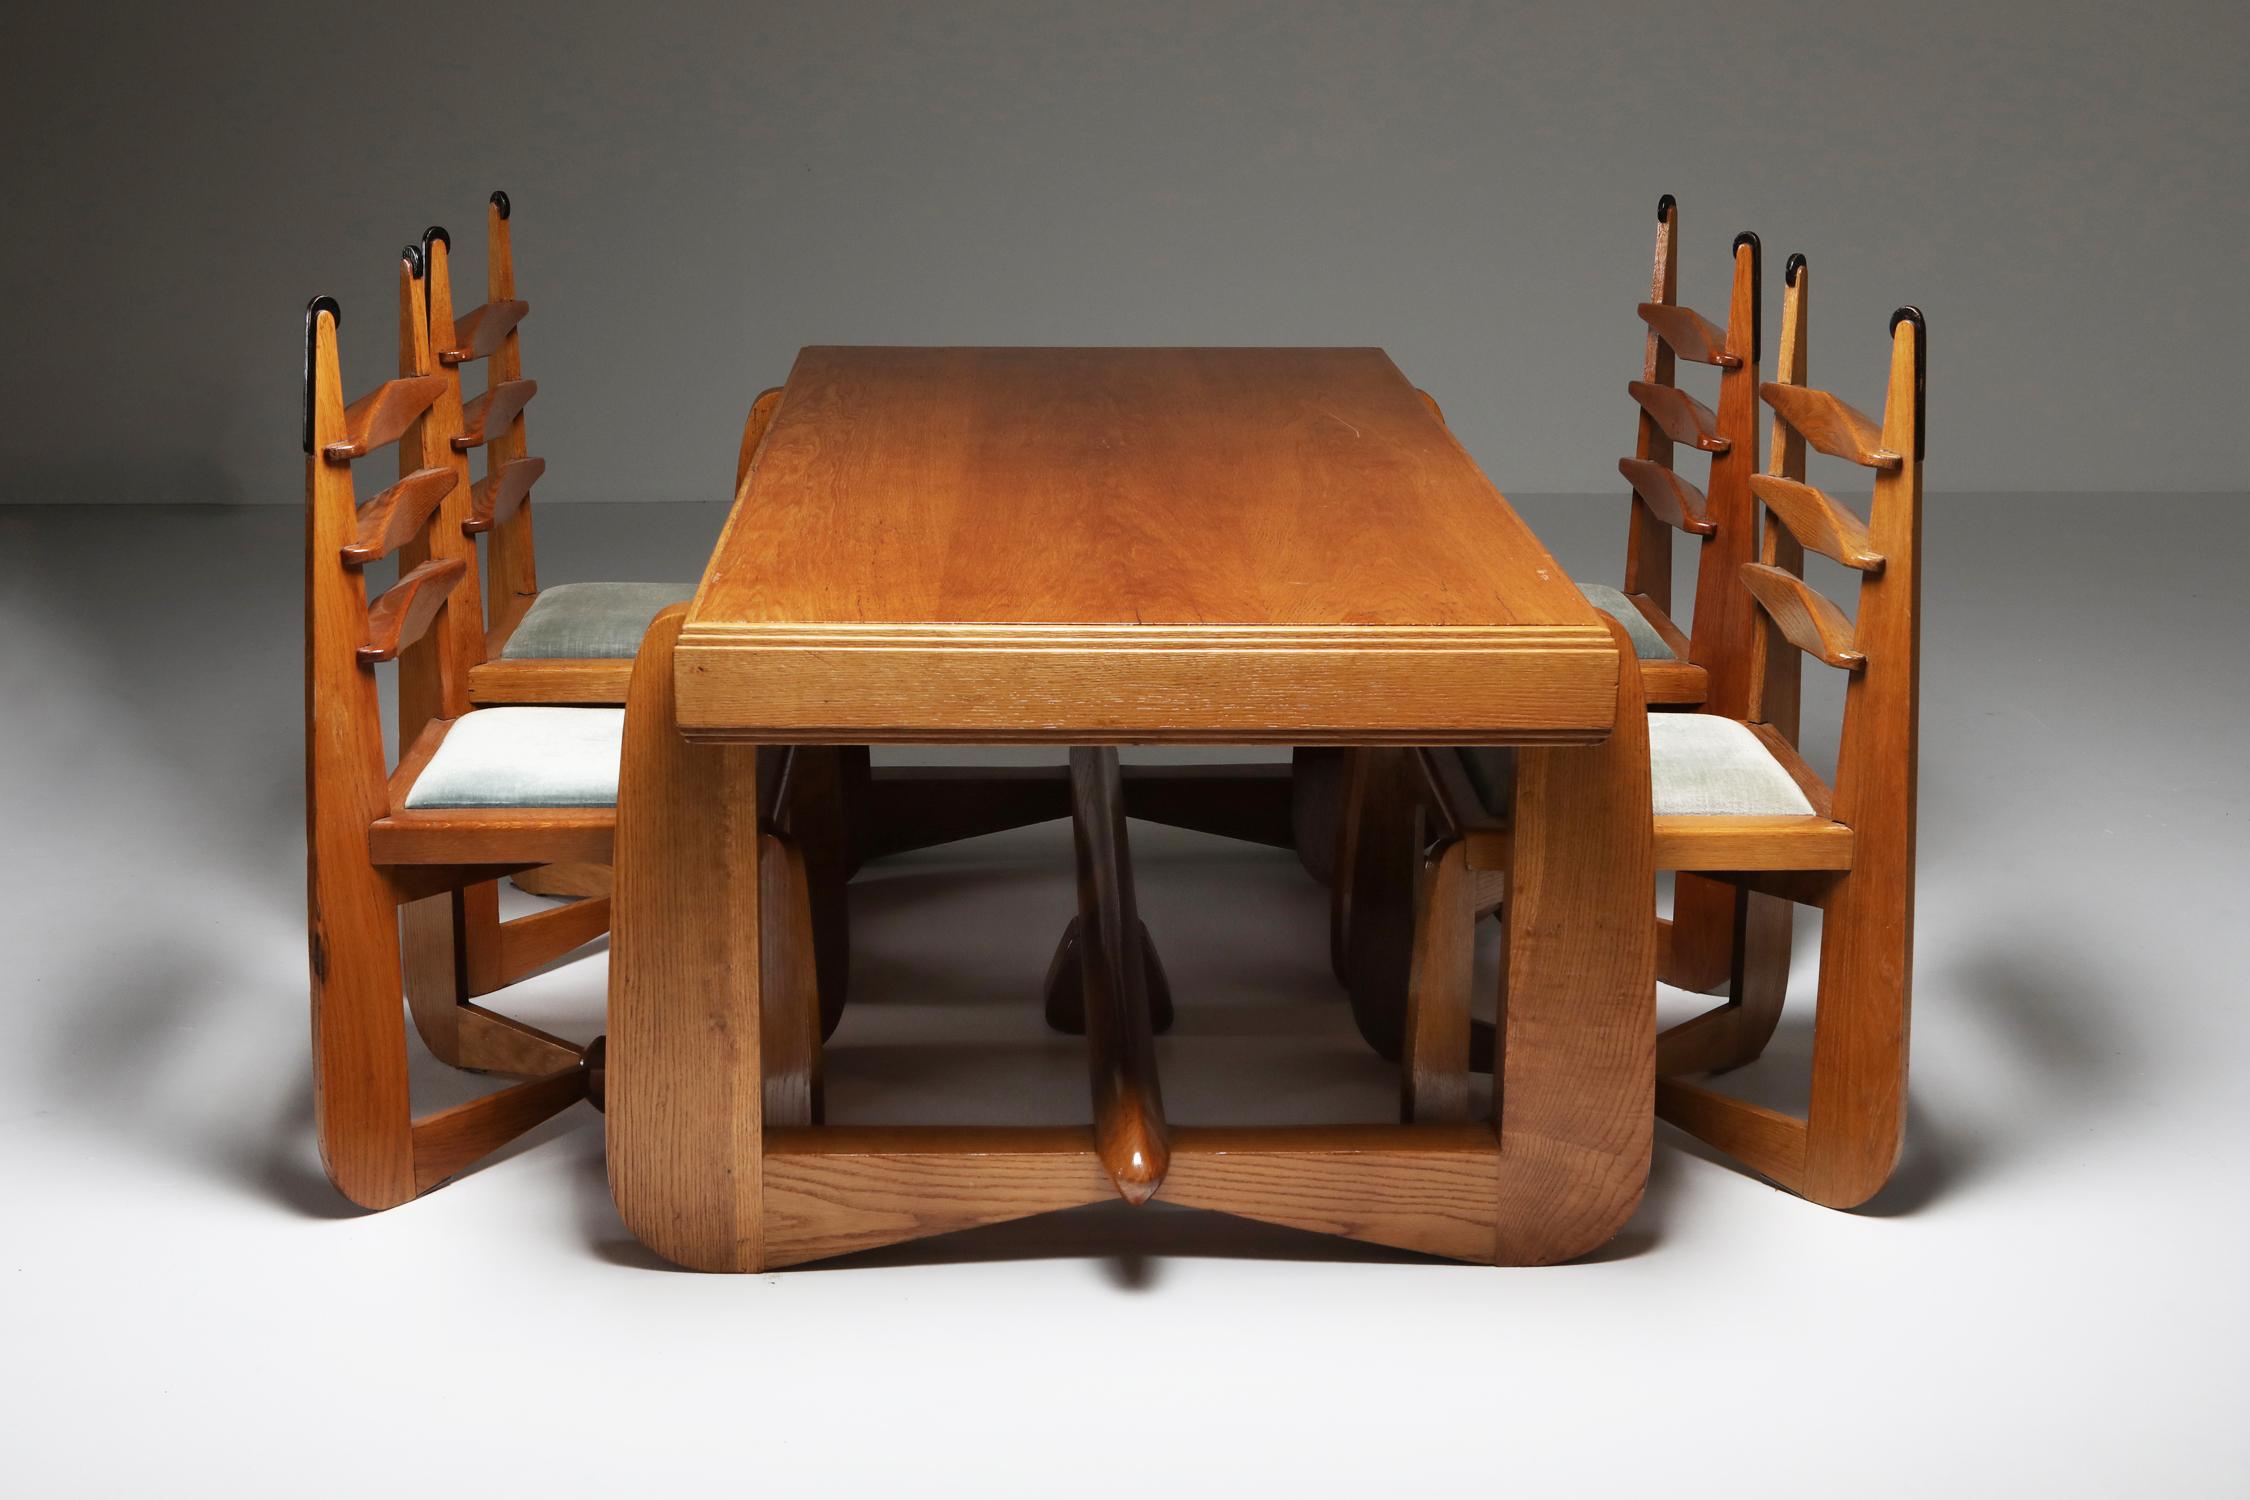 Dining room set, Amsterdamse School, Expressionist, Modern Oak

Exuberant and sculptural Amsterdamse School dining room set, created in the Netherlands in the 1930s. Dutch design, very much in the style of Kramer and Hildo Krop. Both the table and